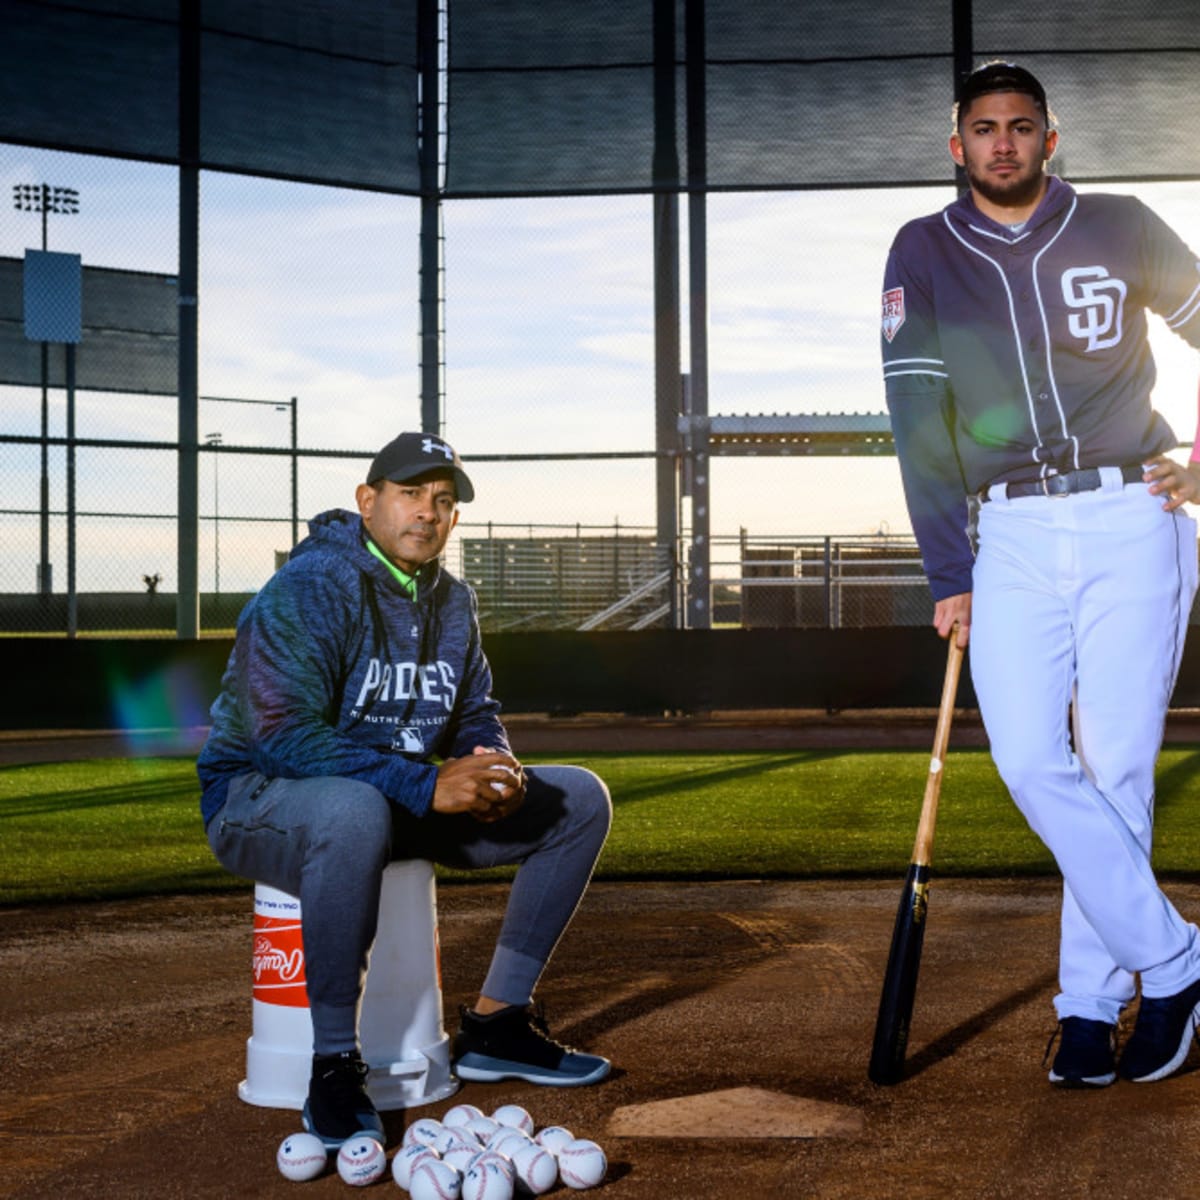 Fernando Tatis Jr. is the future of the Padres and MLB - Sports